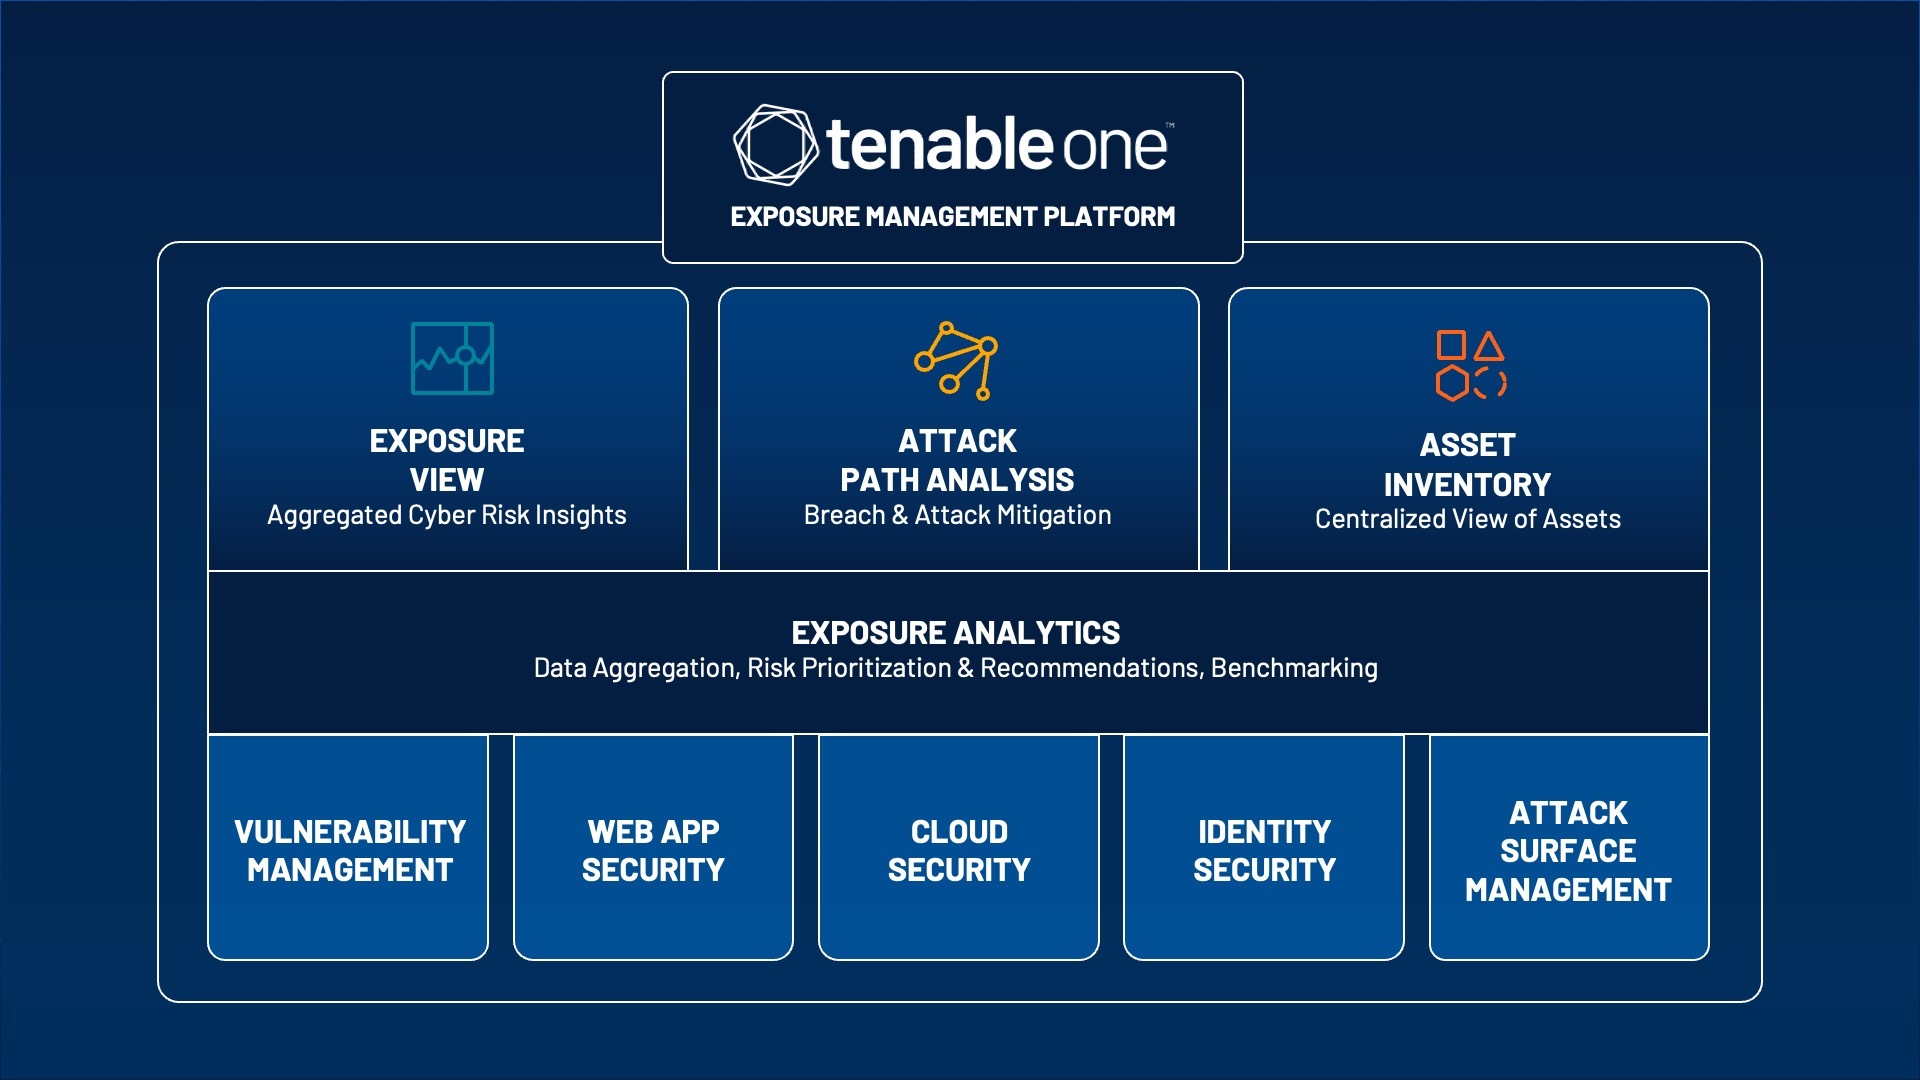 Introducing the Tenable One Exposure Management Platform